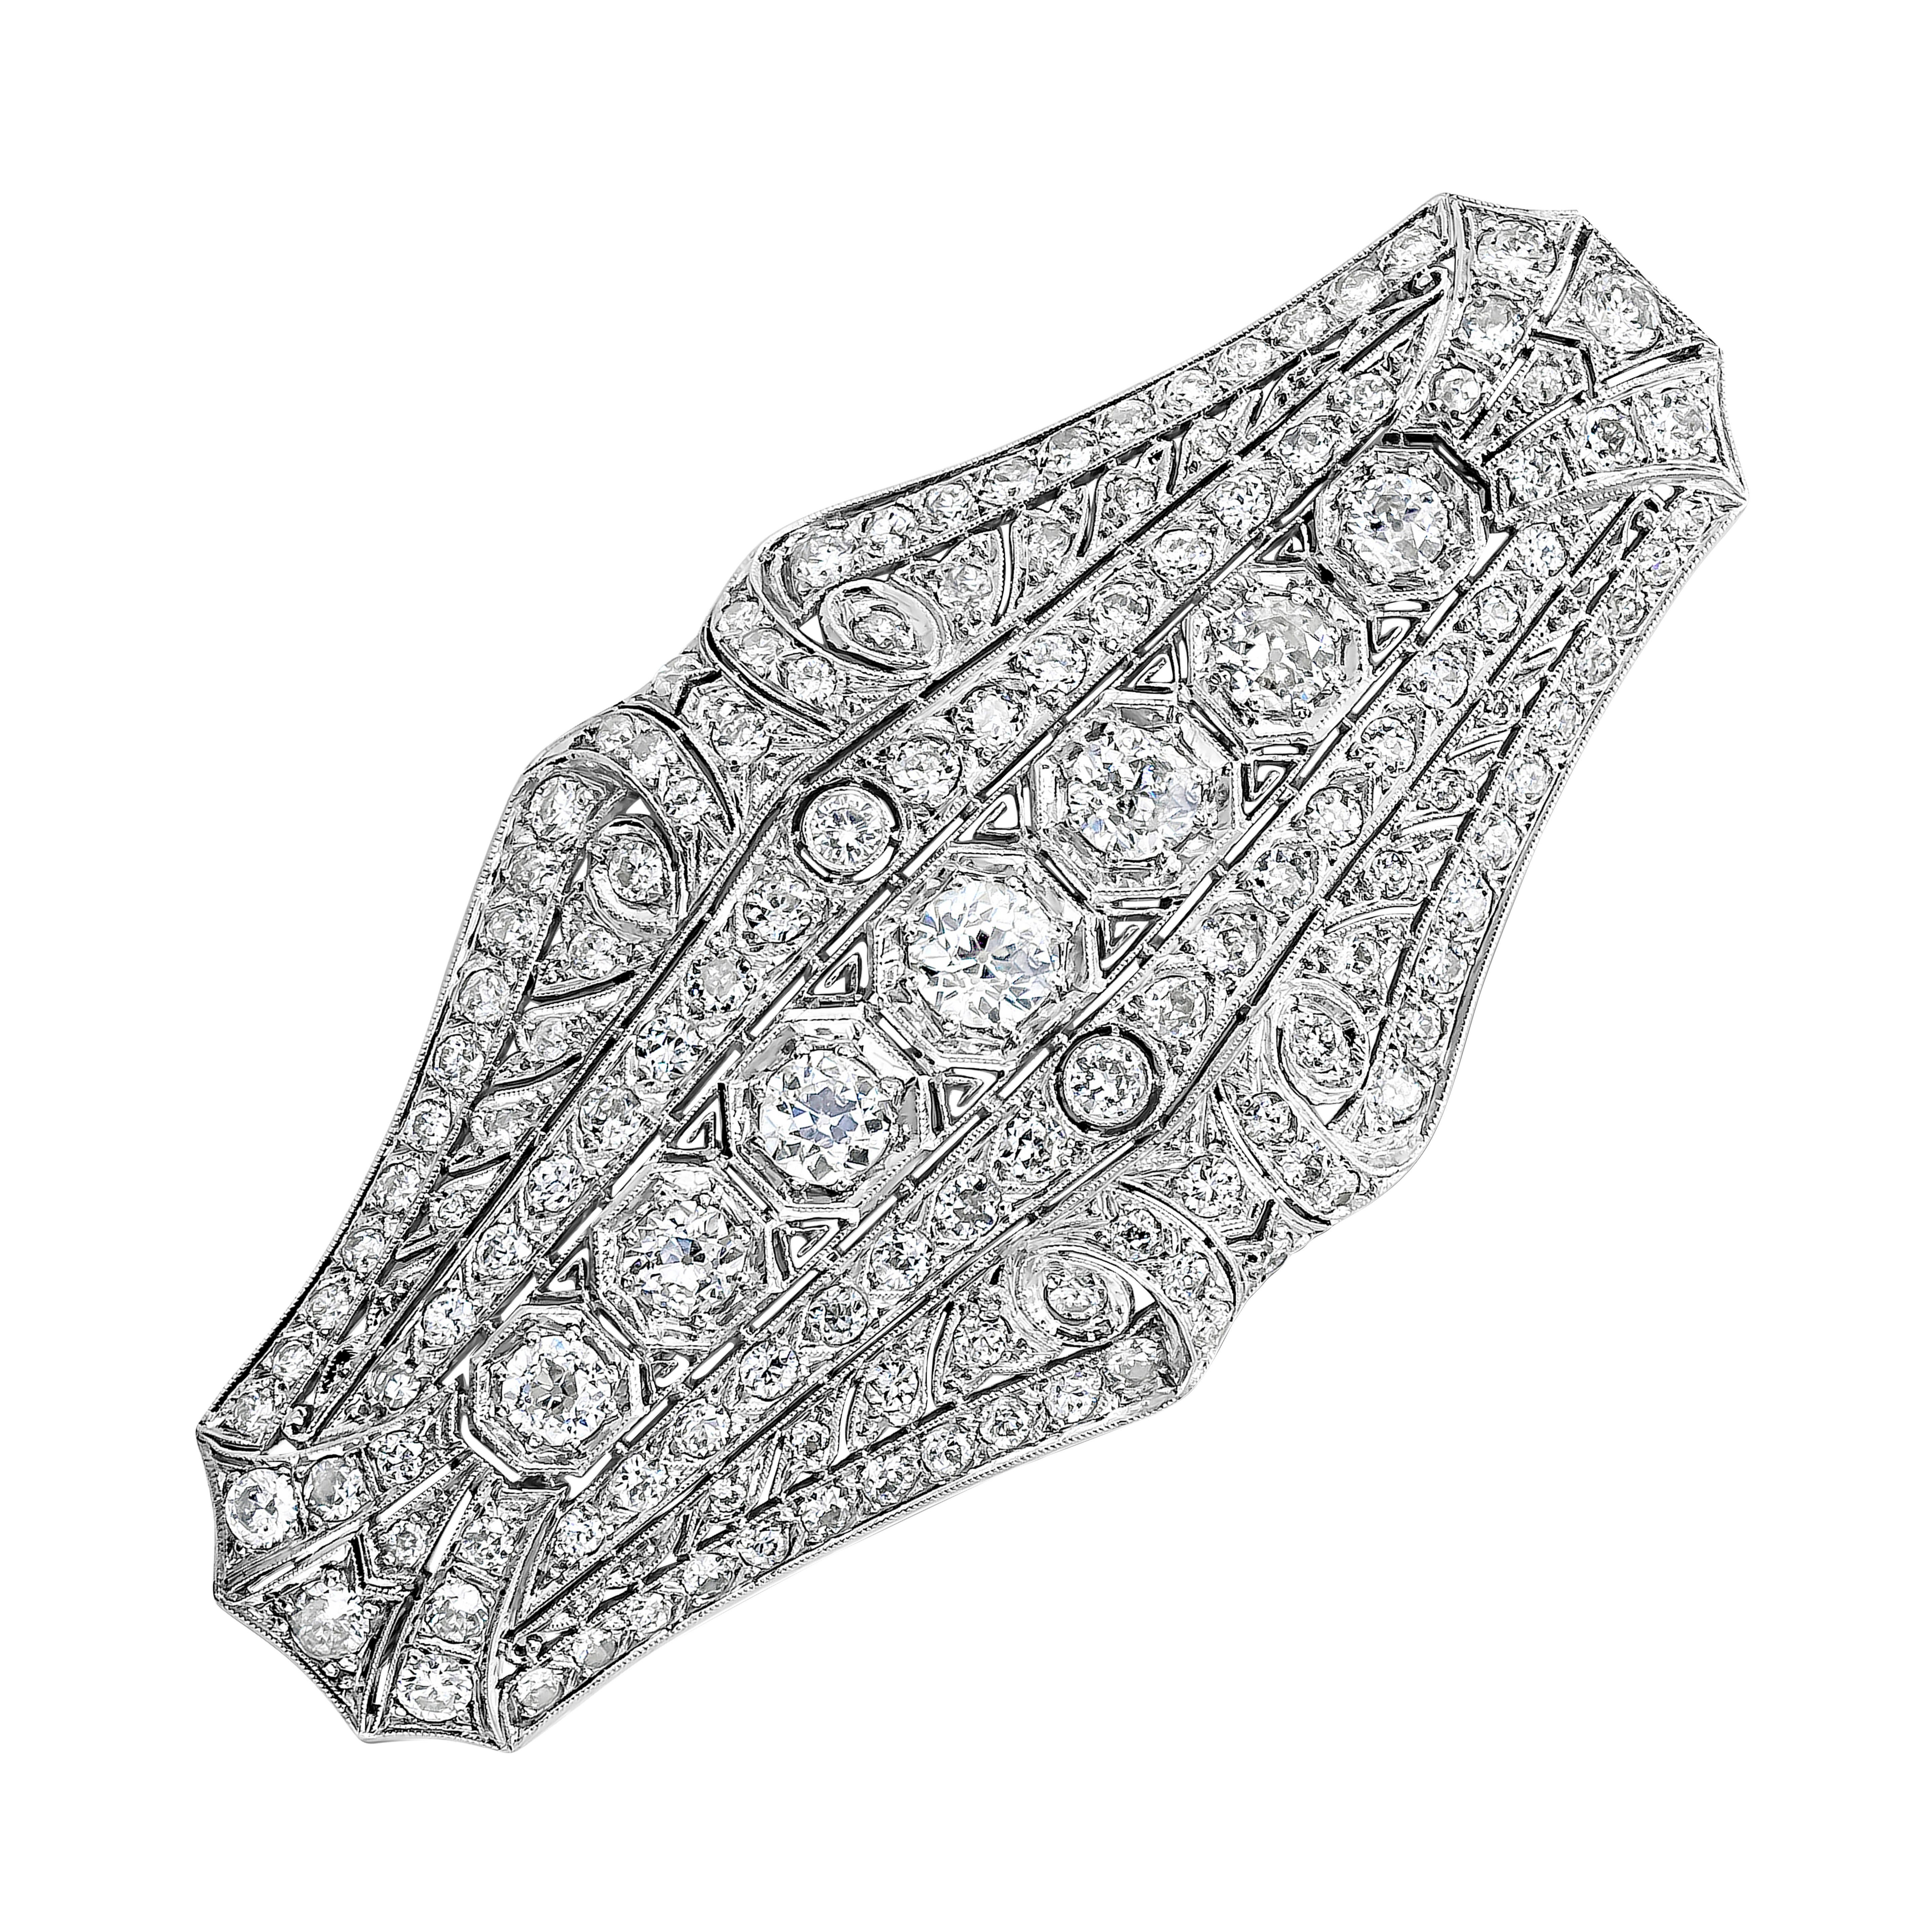 Showcasing an art deco style pendant brooch accented with 147 brilliant round cut diamonds weighing 7.48 carats total, set in an antique-looking design. Finely made in polished platinum, 2.75 inches in length and 1.25 inches in width.

